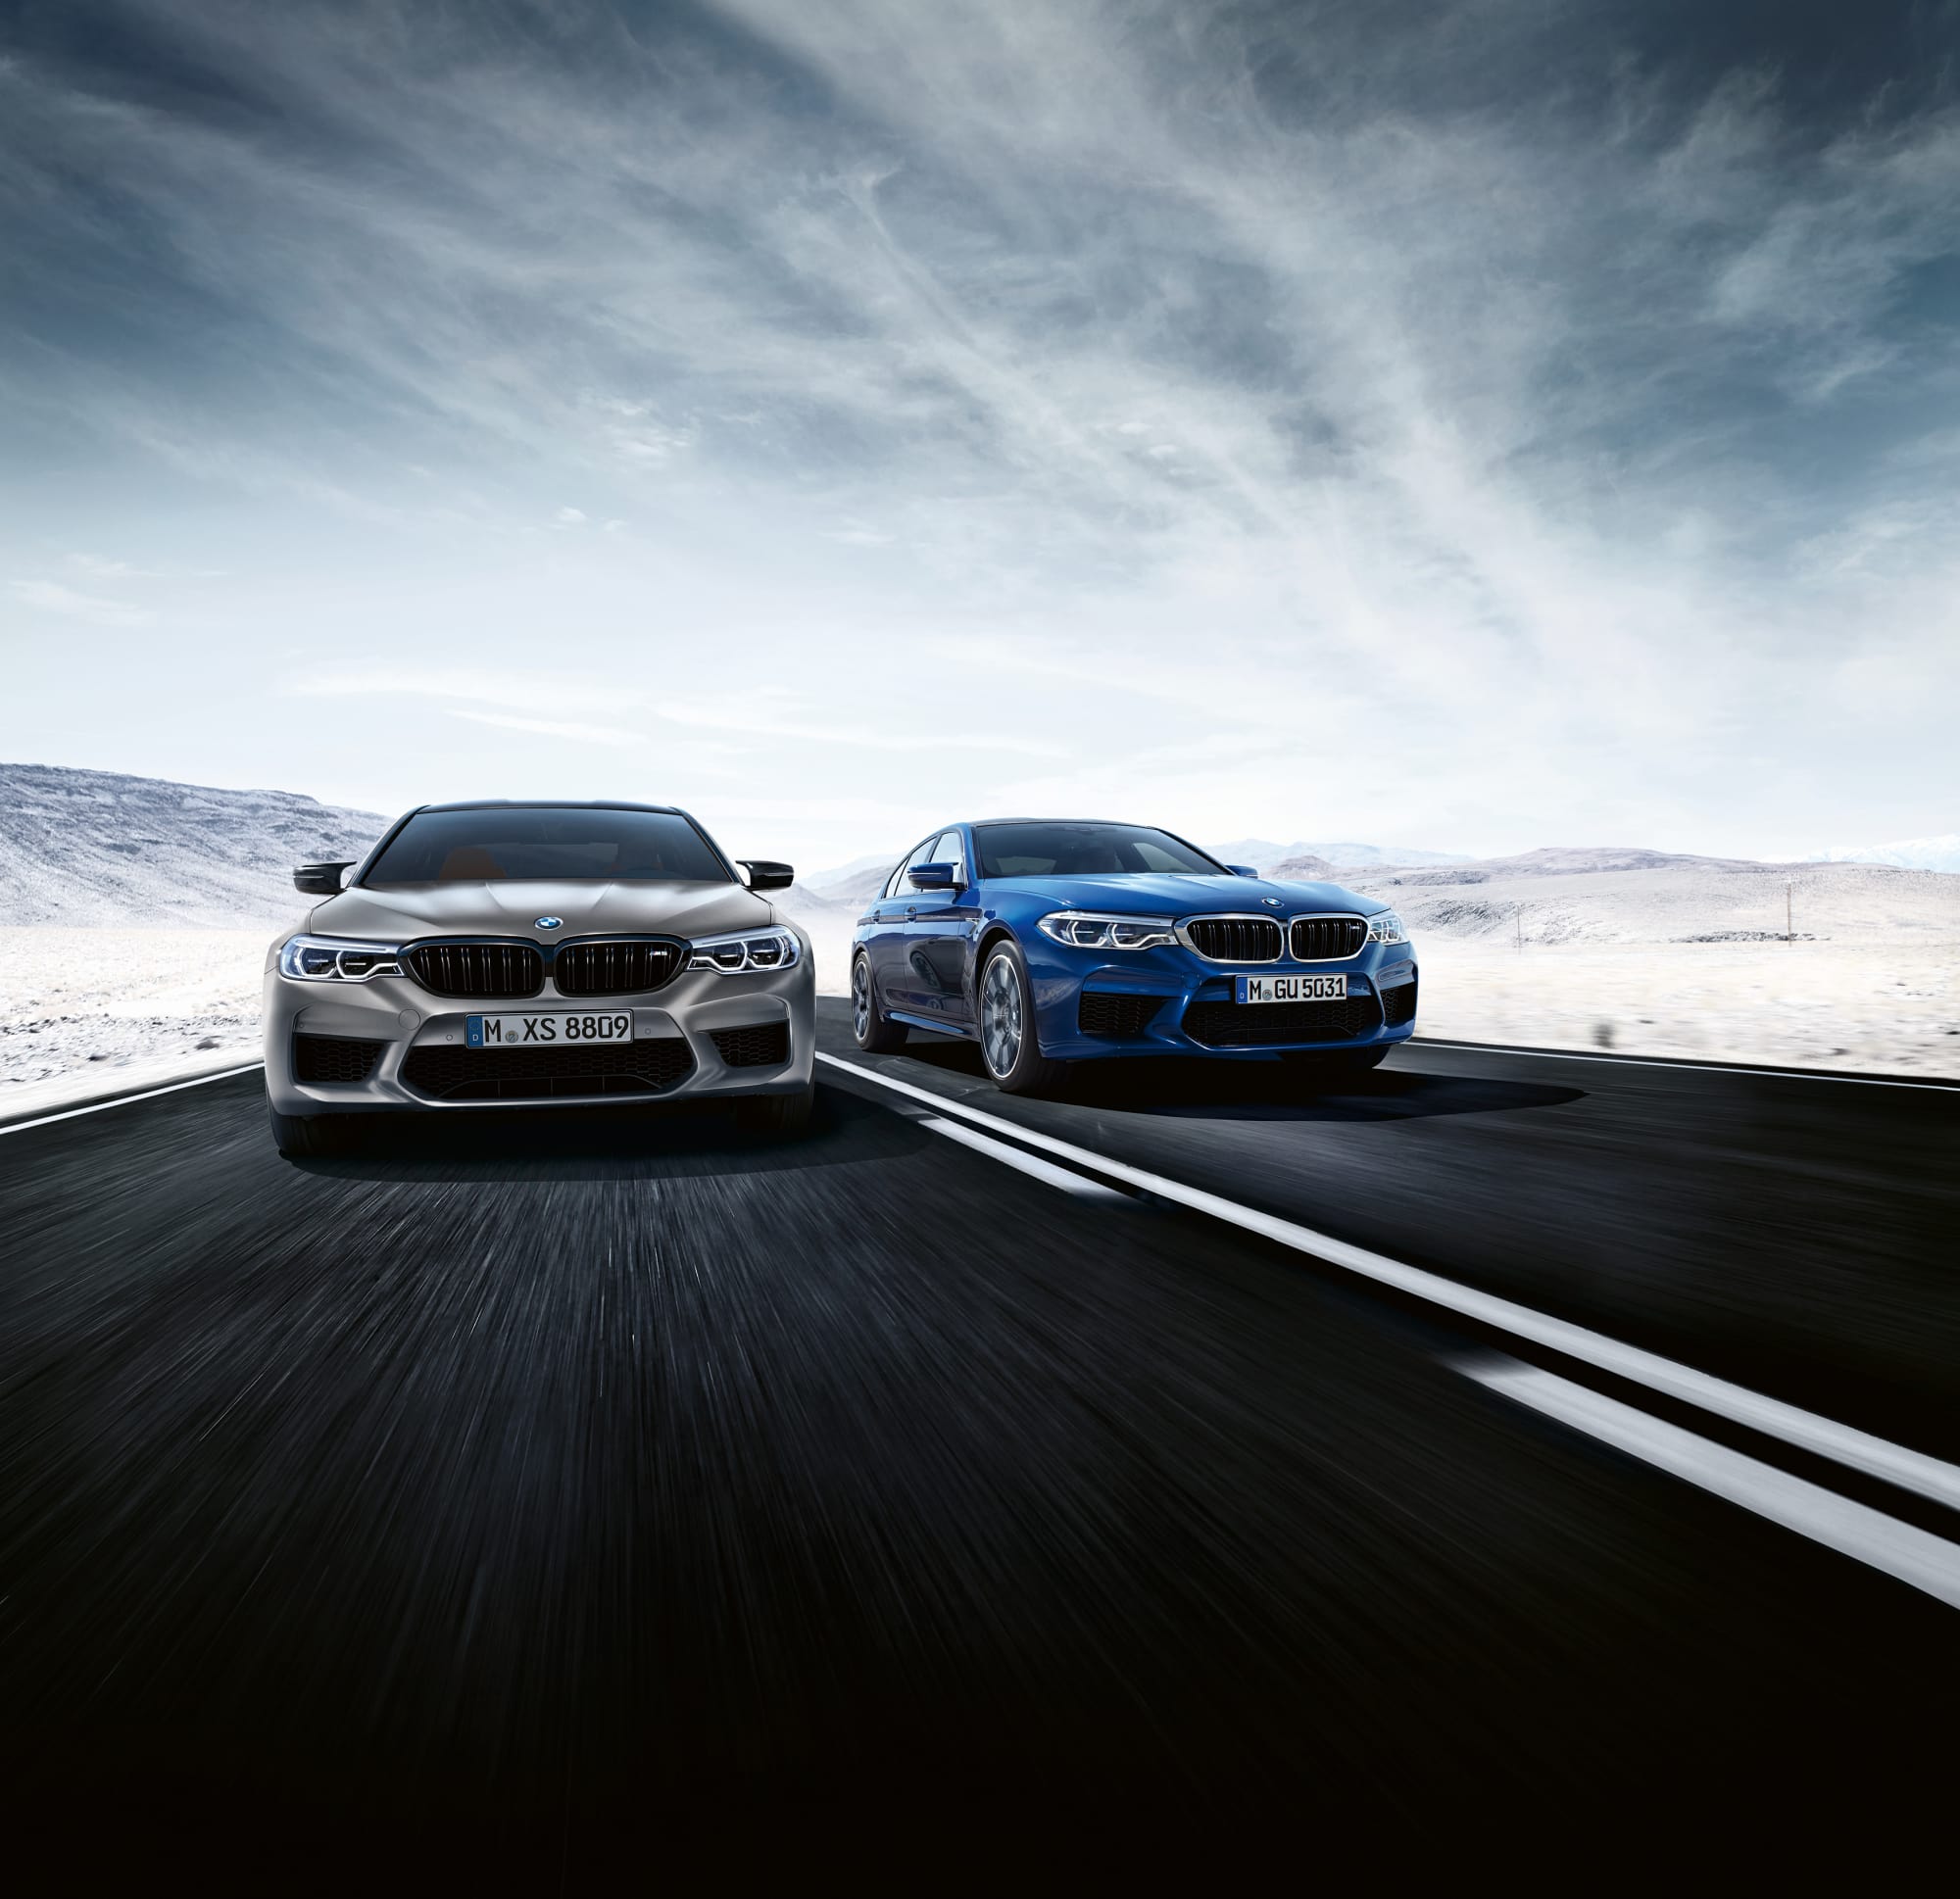 The new BMW M5 Competition is 616hp of pure adrenaline rush